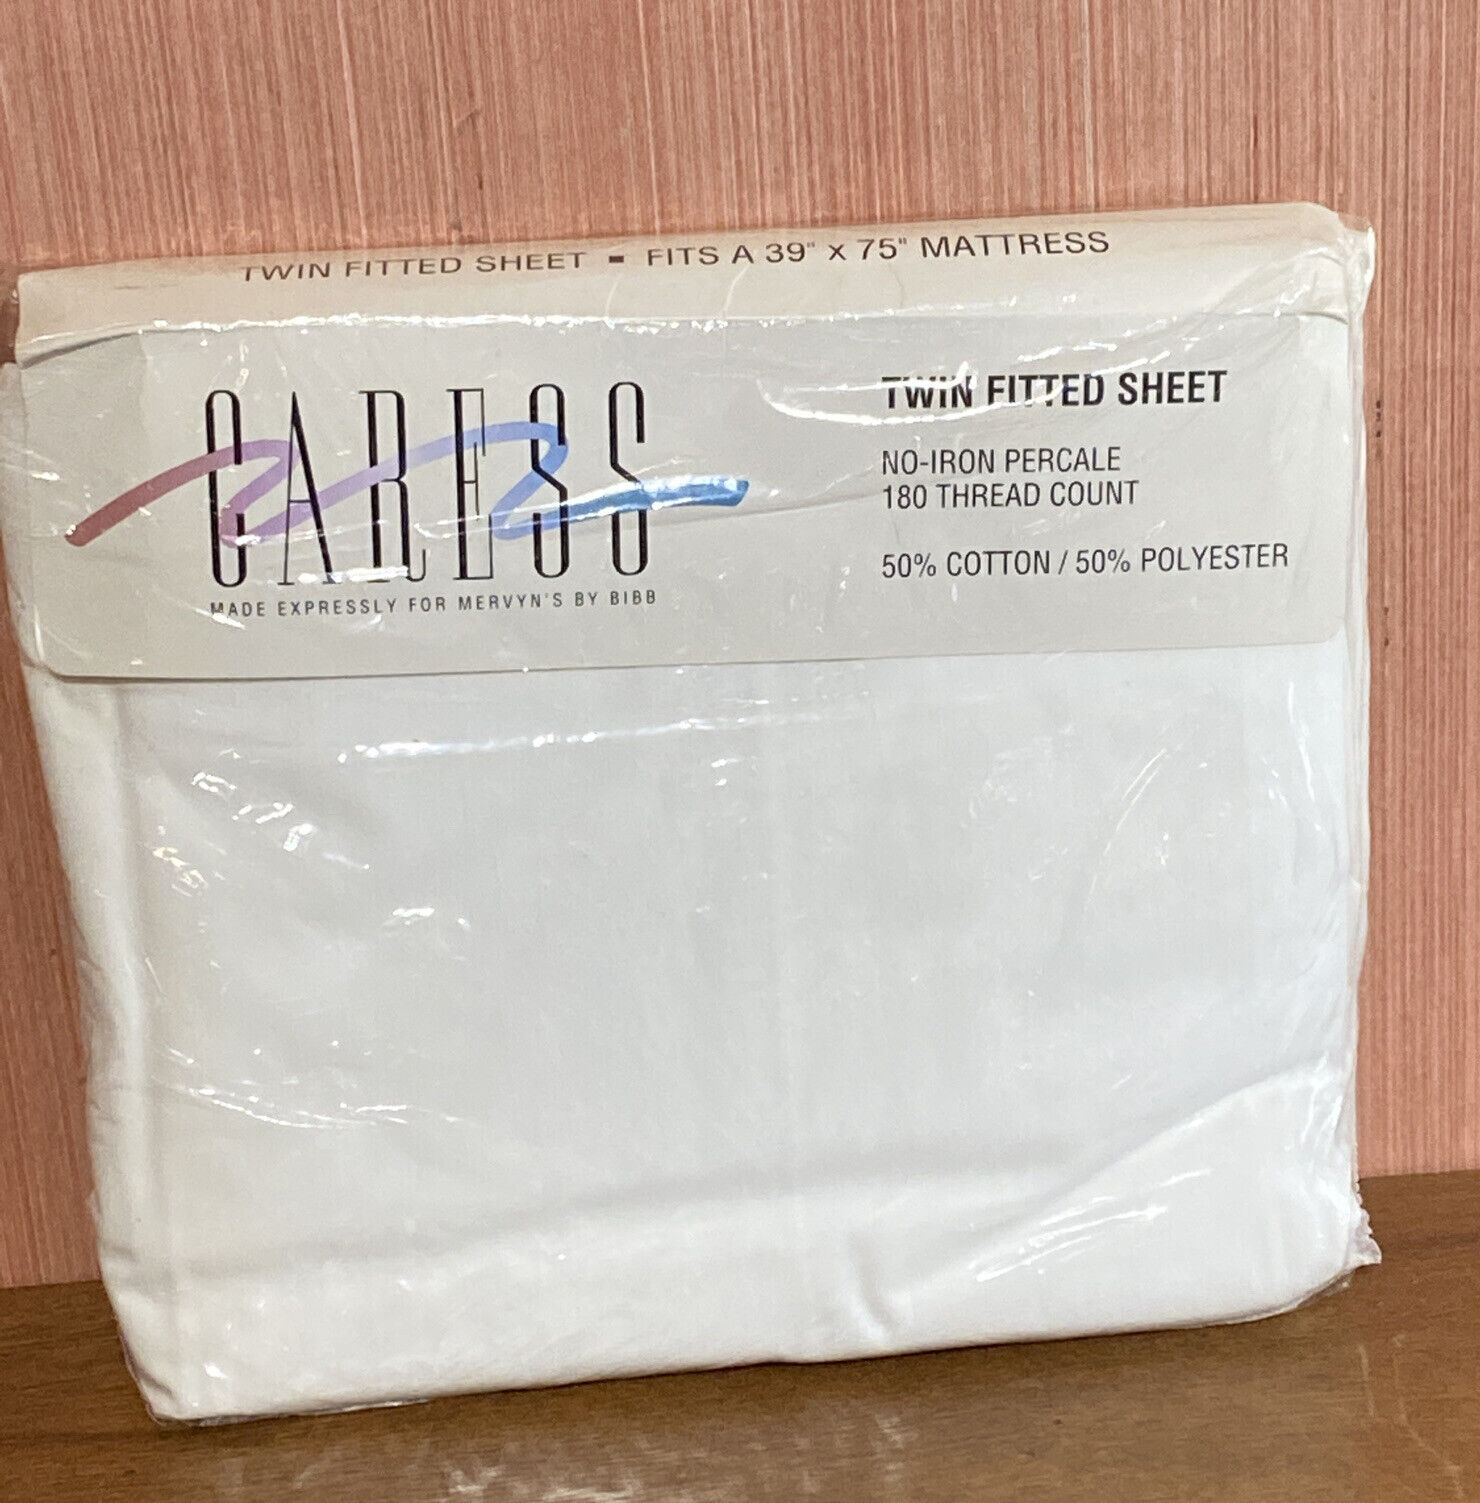 New Vintage 1992 Caress Twin No Iron Percale Fitted Sheet White